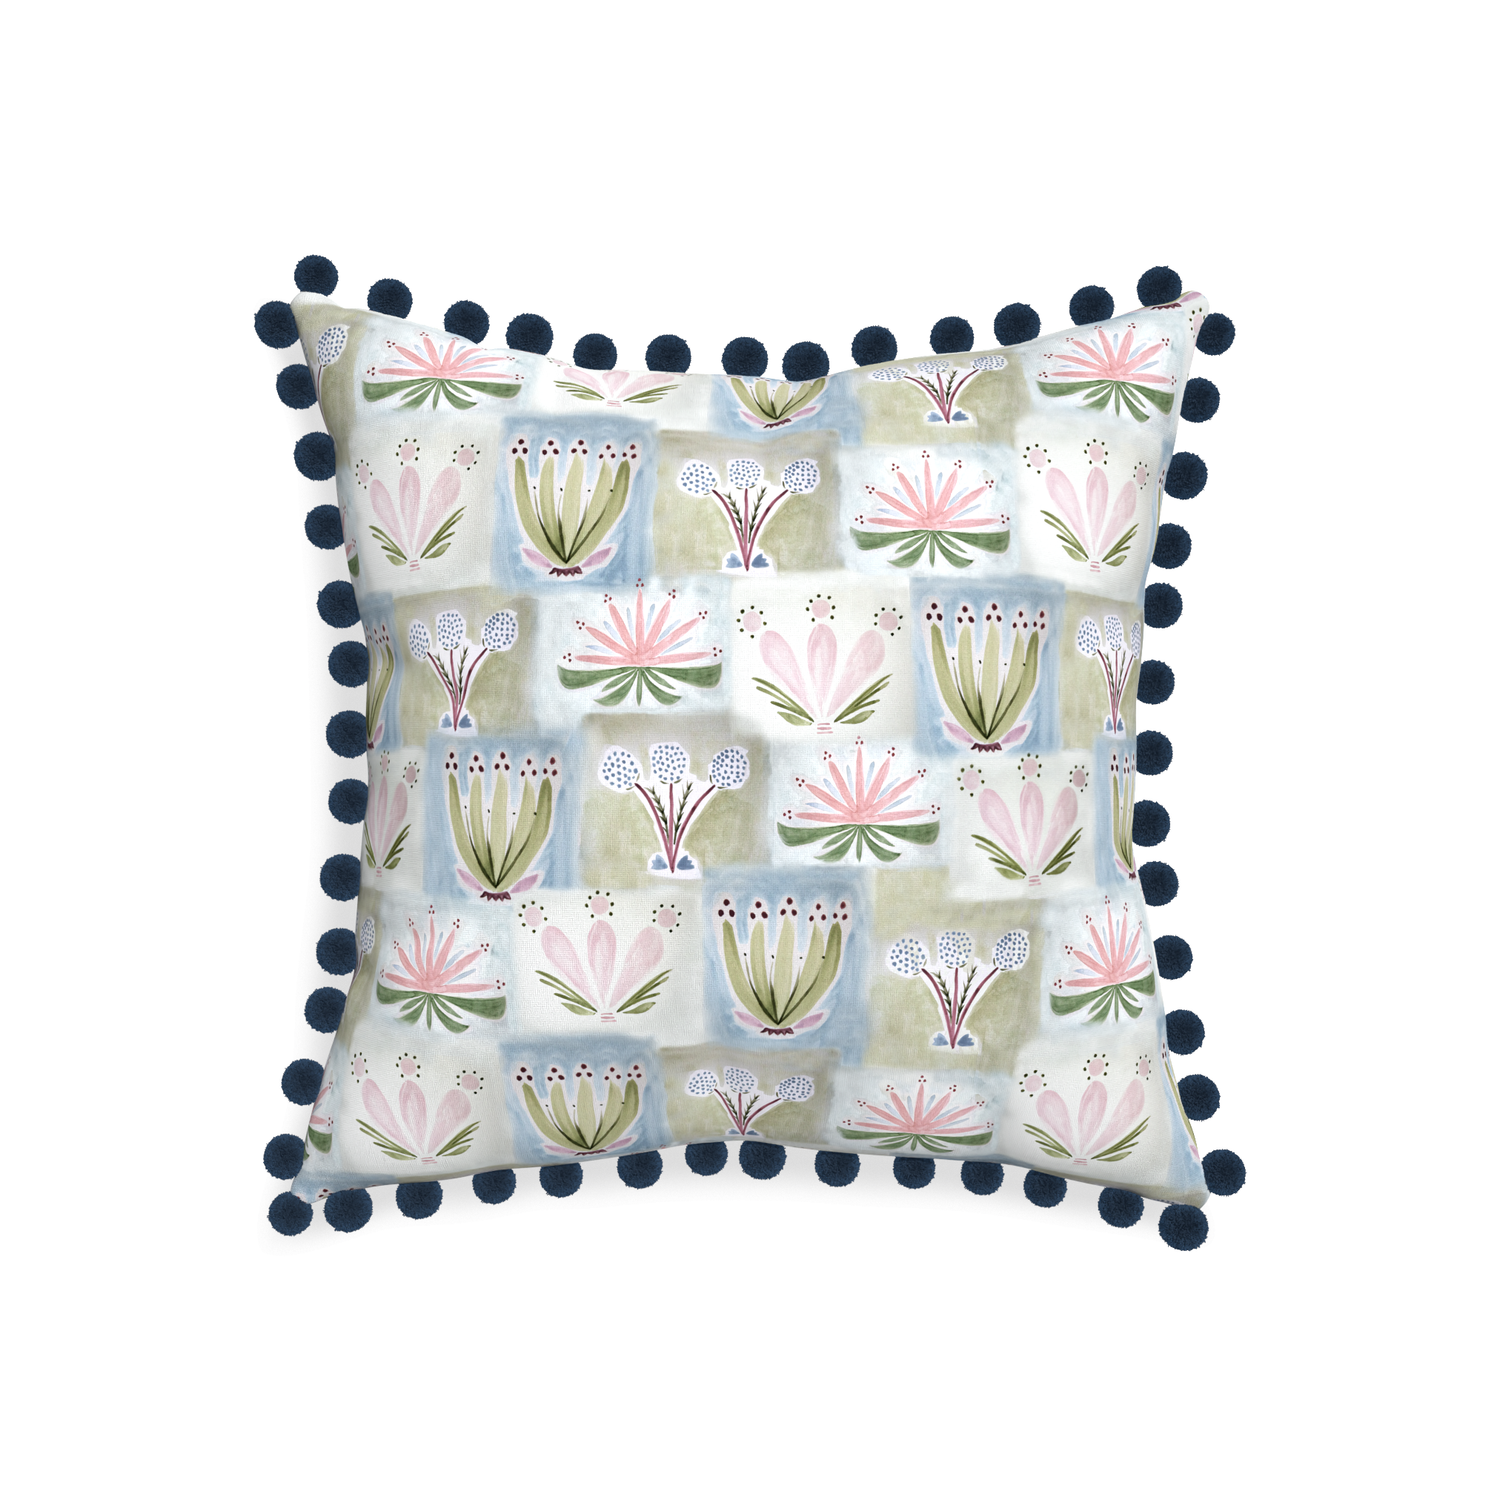 20-square harper custom hand-painted floralpillow with c on white background